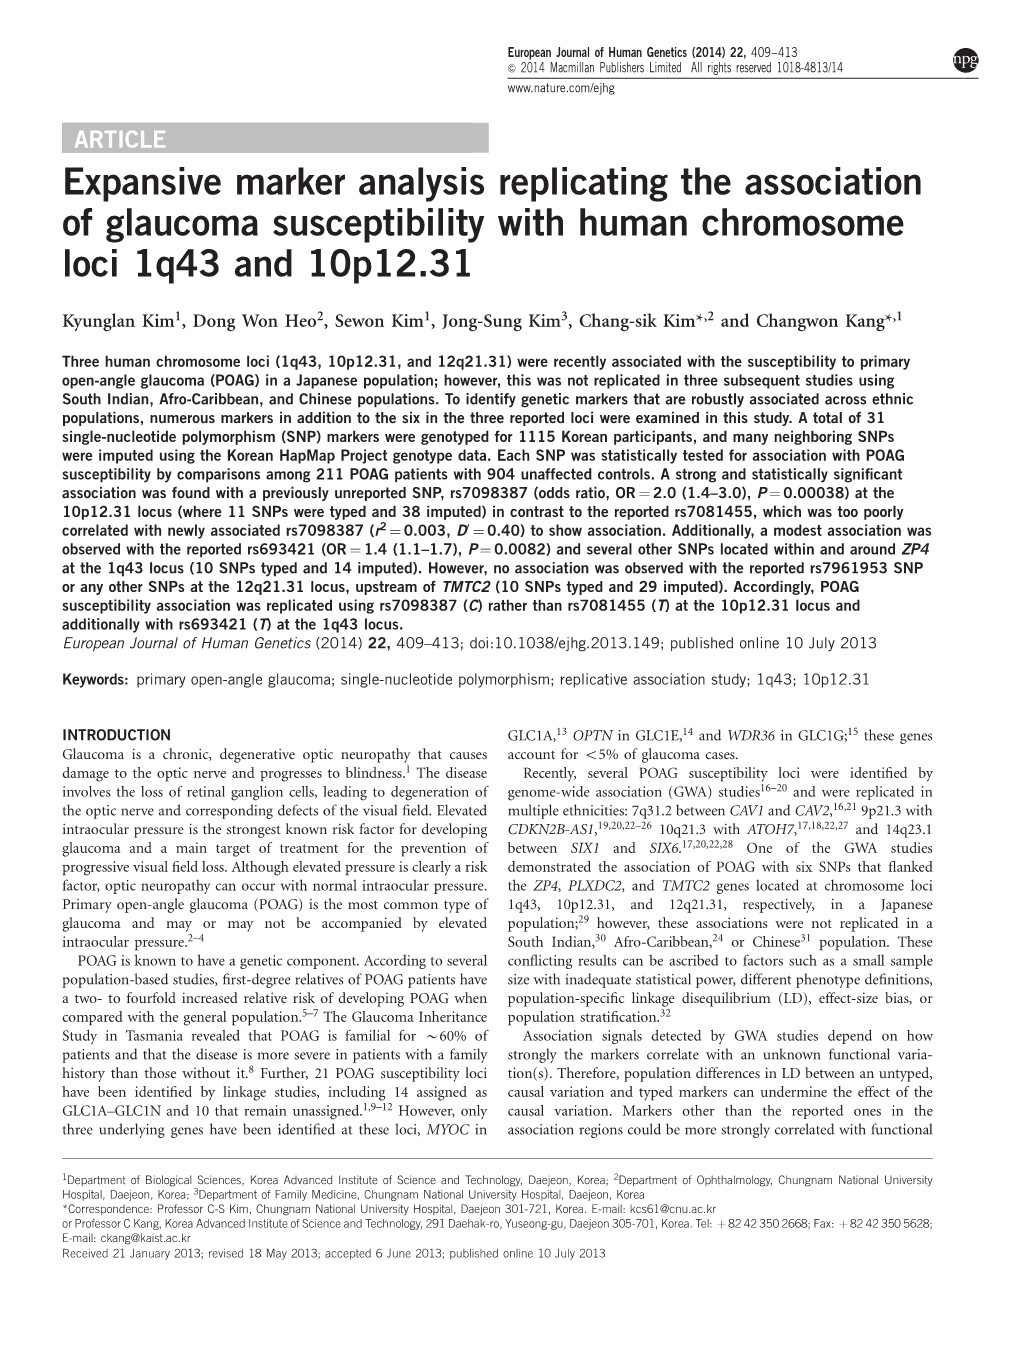 Expansive Marker Analysis Replicating the Association of Glaucoma Susceptibility with Human Chromosome Loci 1Q43 and 10P12.31